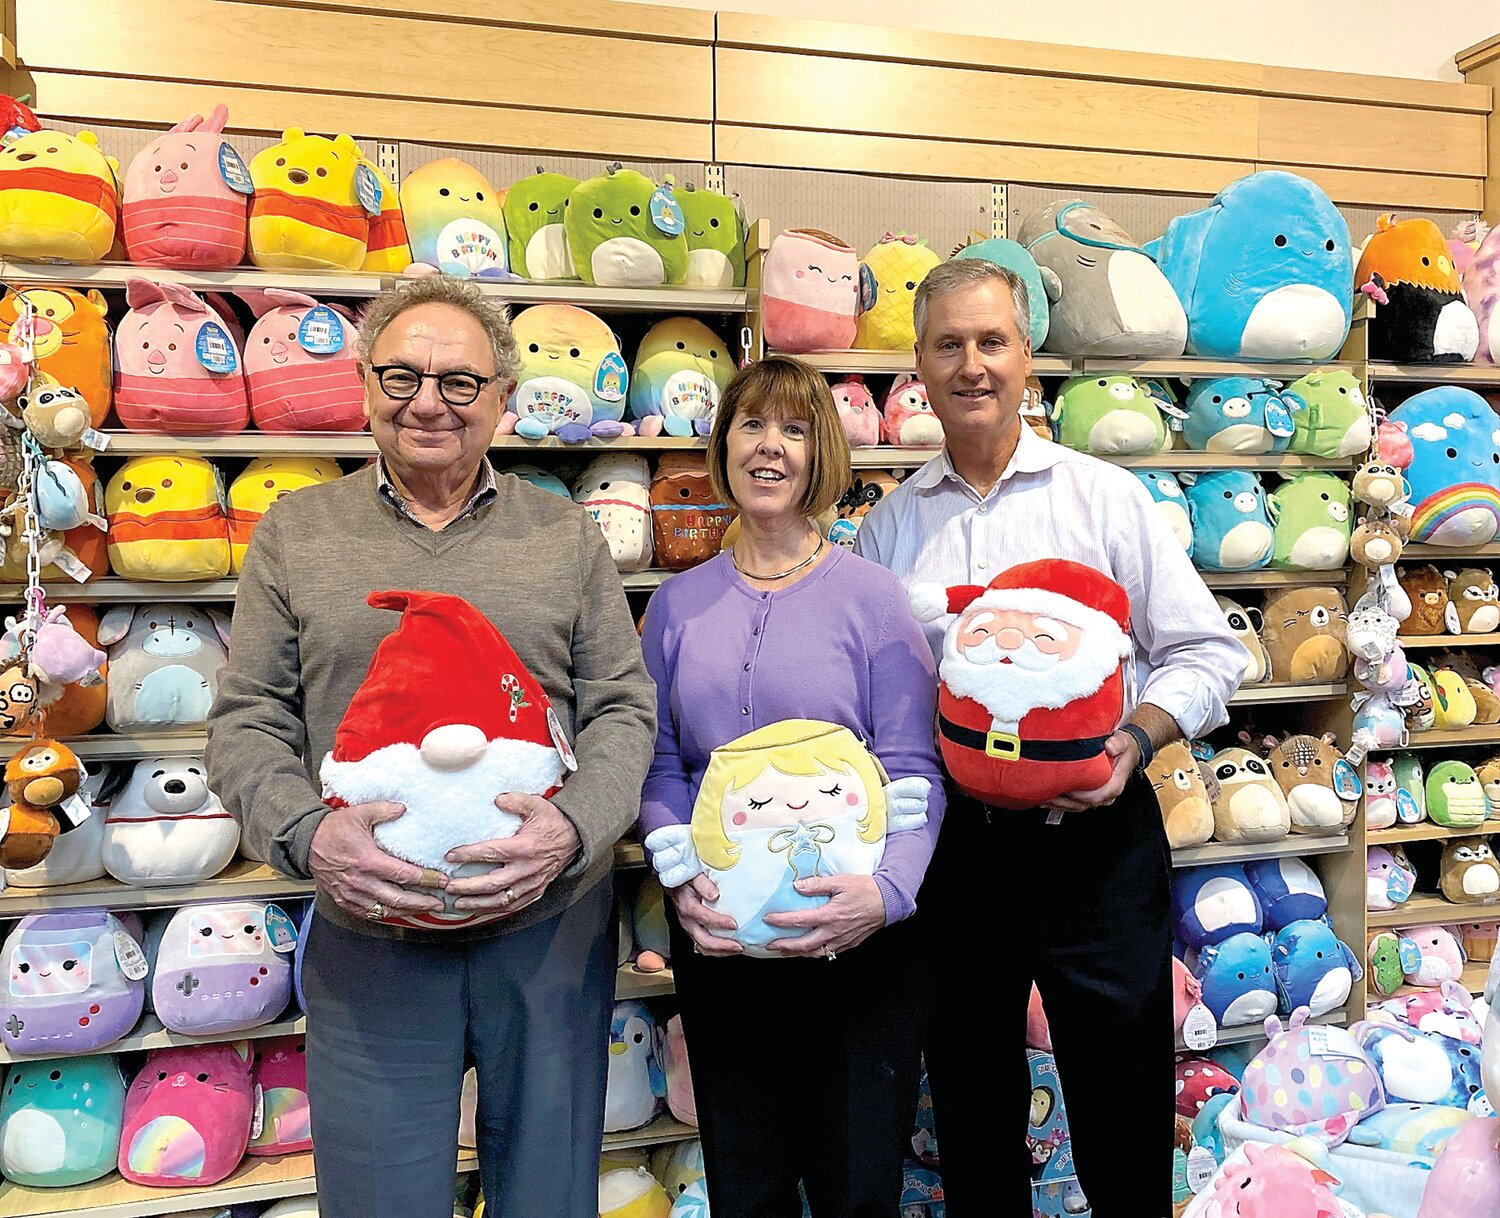 From left are Howard Henschel, Norman’s Hallmark president and chief executive officer; Noreen Batdorf, buyer; and Vince Navitsky, vice president of retail, all holding Squishmallows stuffed toys.